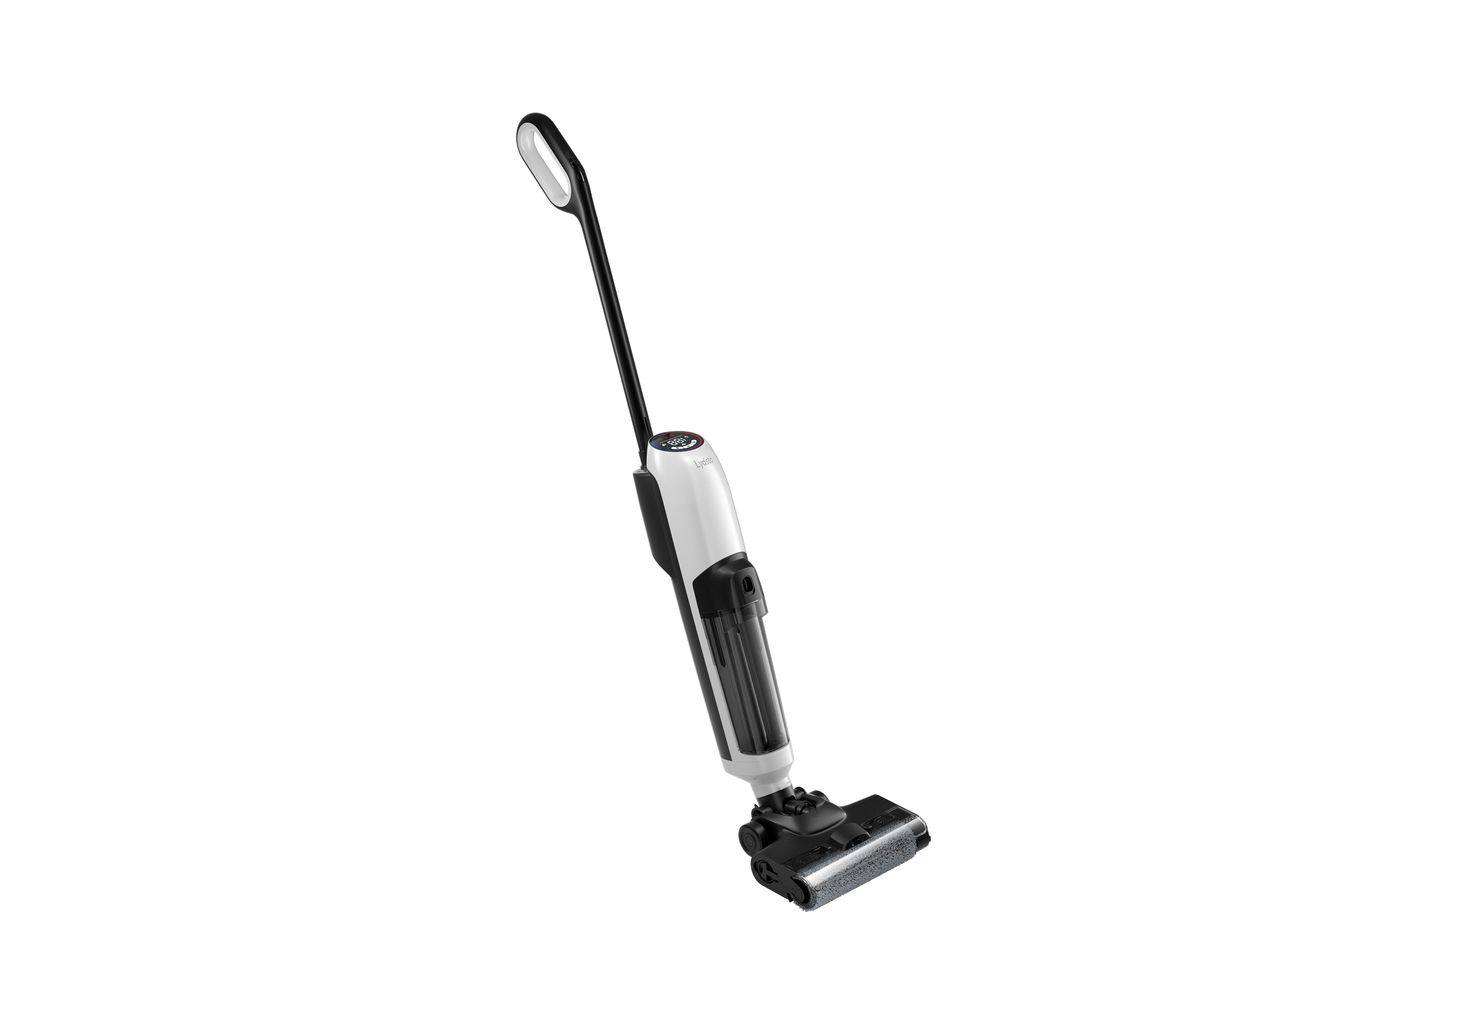 Lydsto Handheld Wet And Dry Stick Vacuum Cleaner W1 (YM-W1-W02)